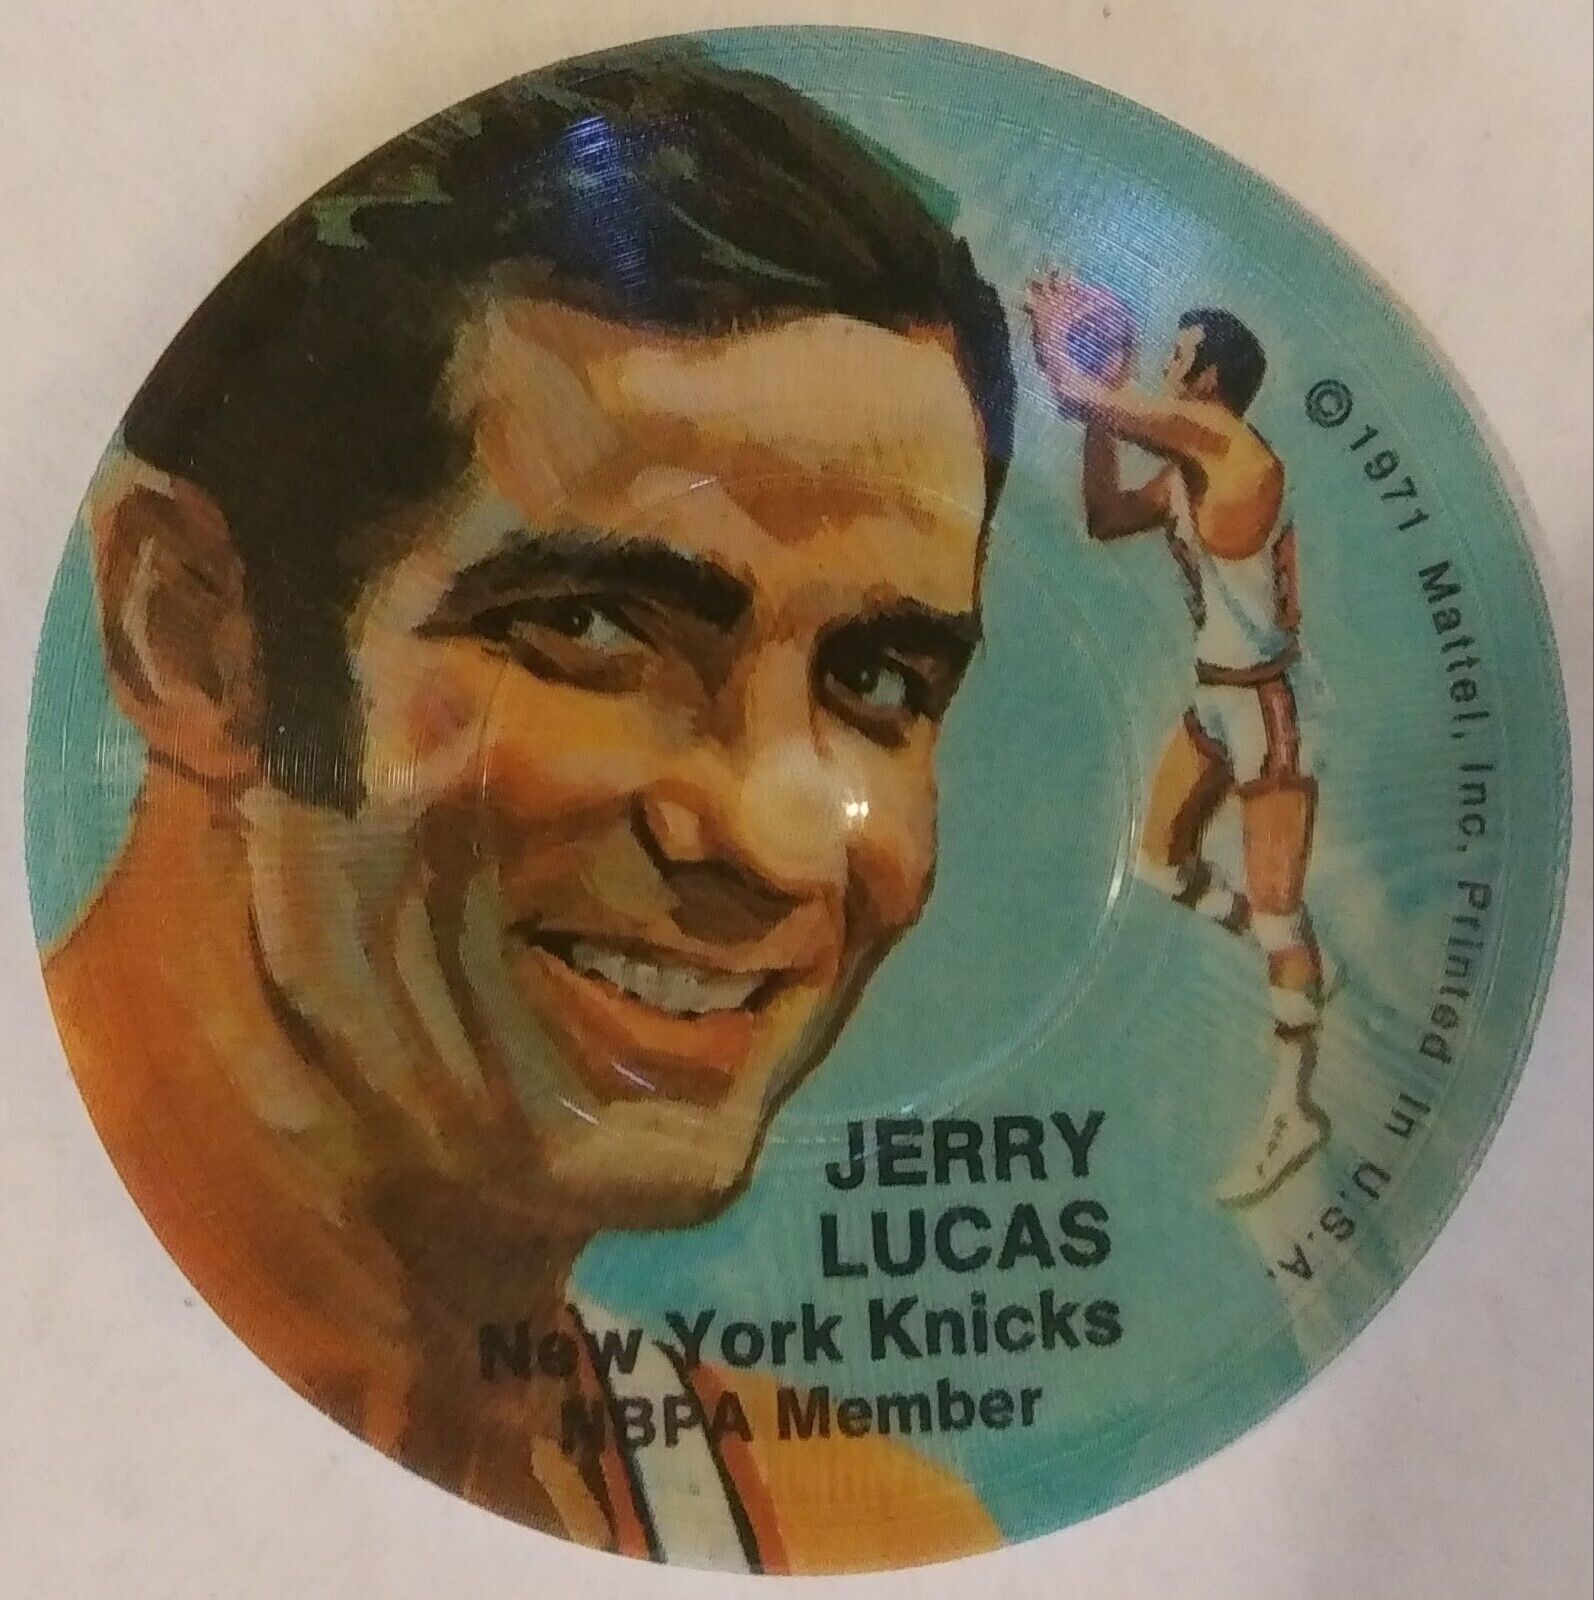 1971 Mattel Instant Replay JERRY LUCAS Double-Sided Mini Record (B) - UNPLAYED